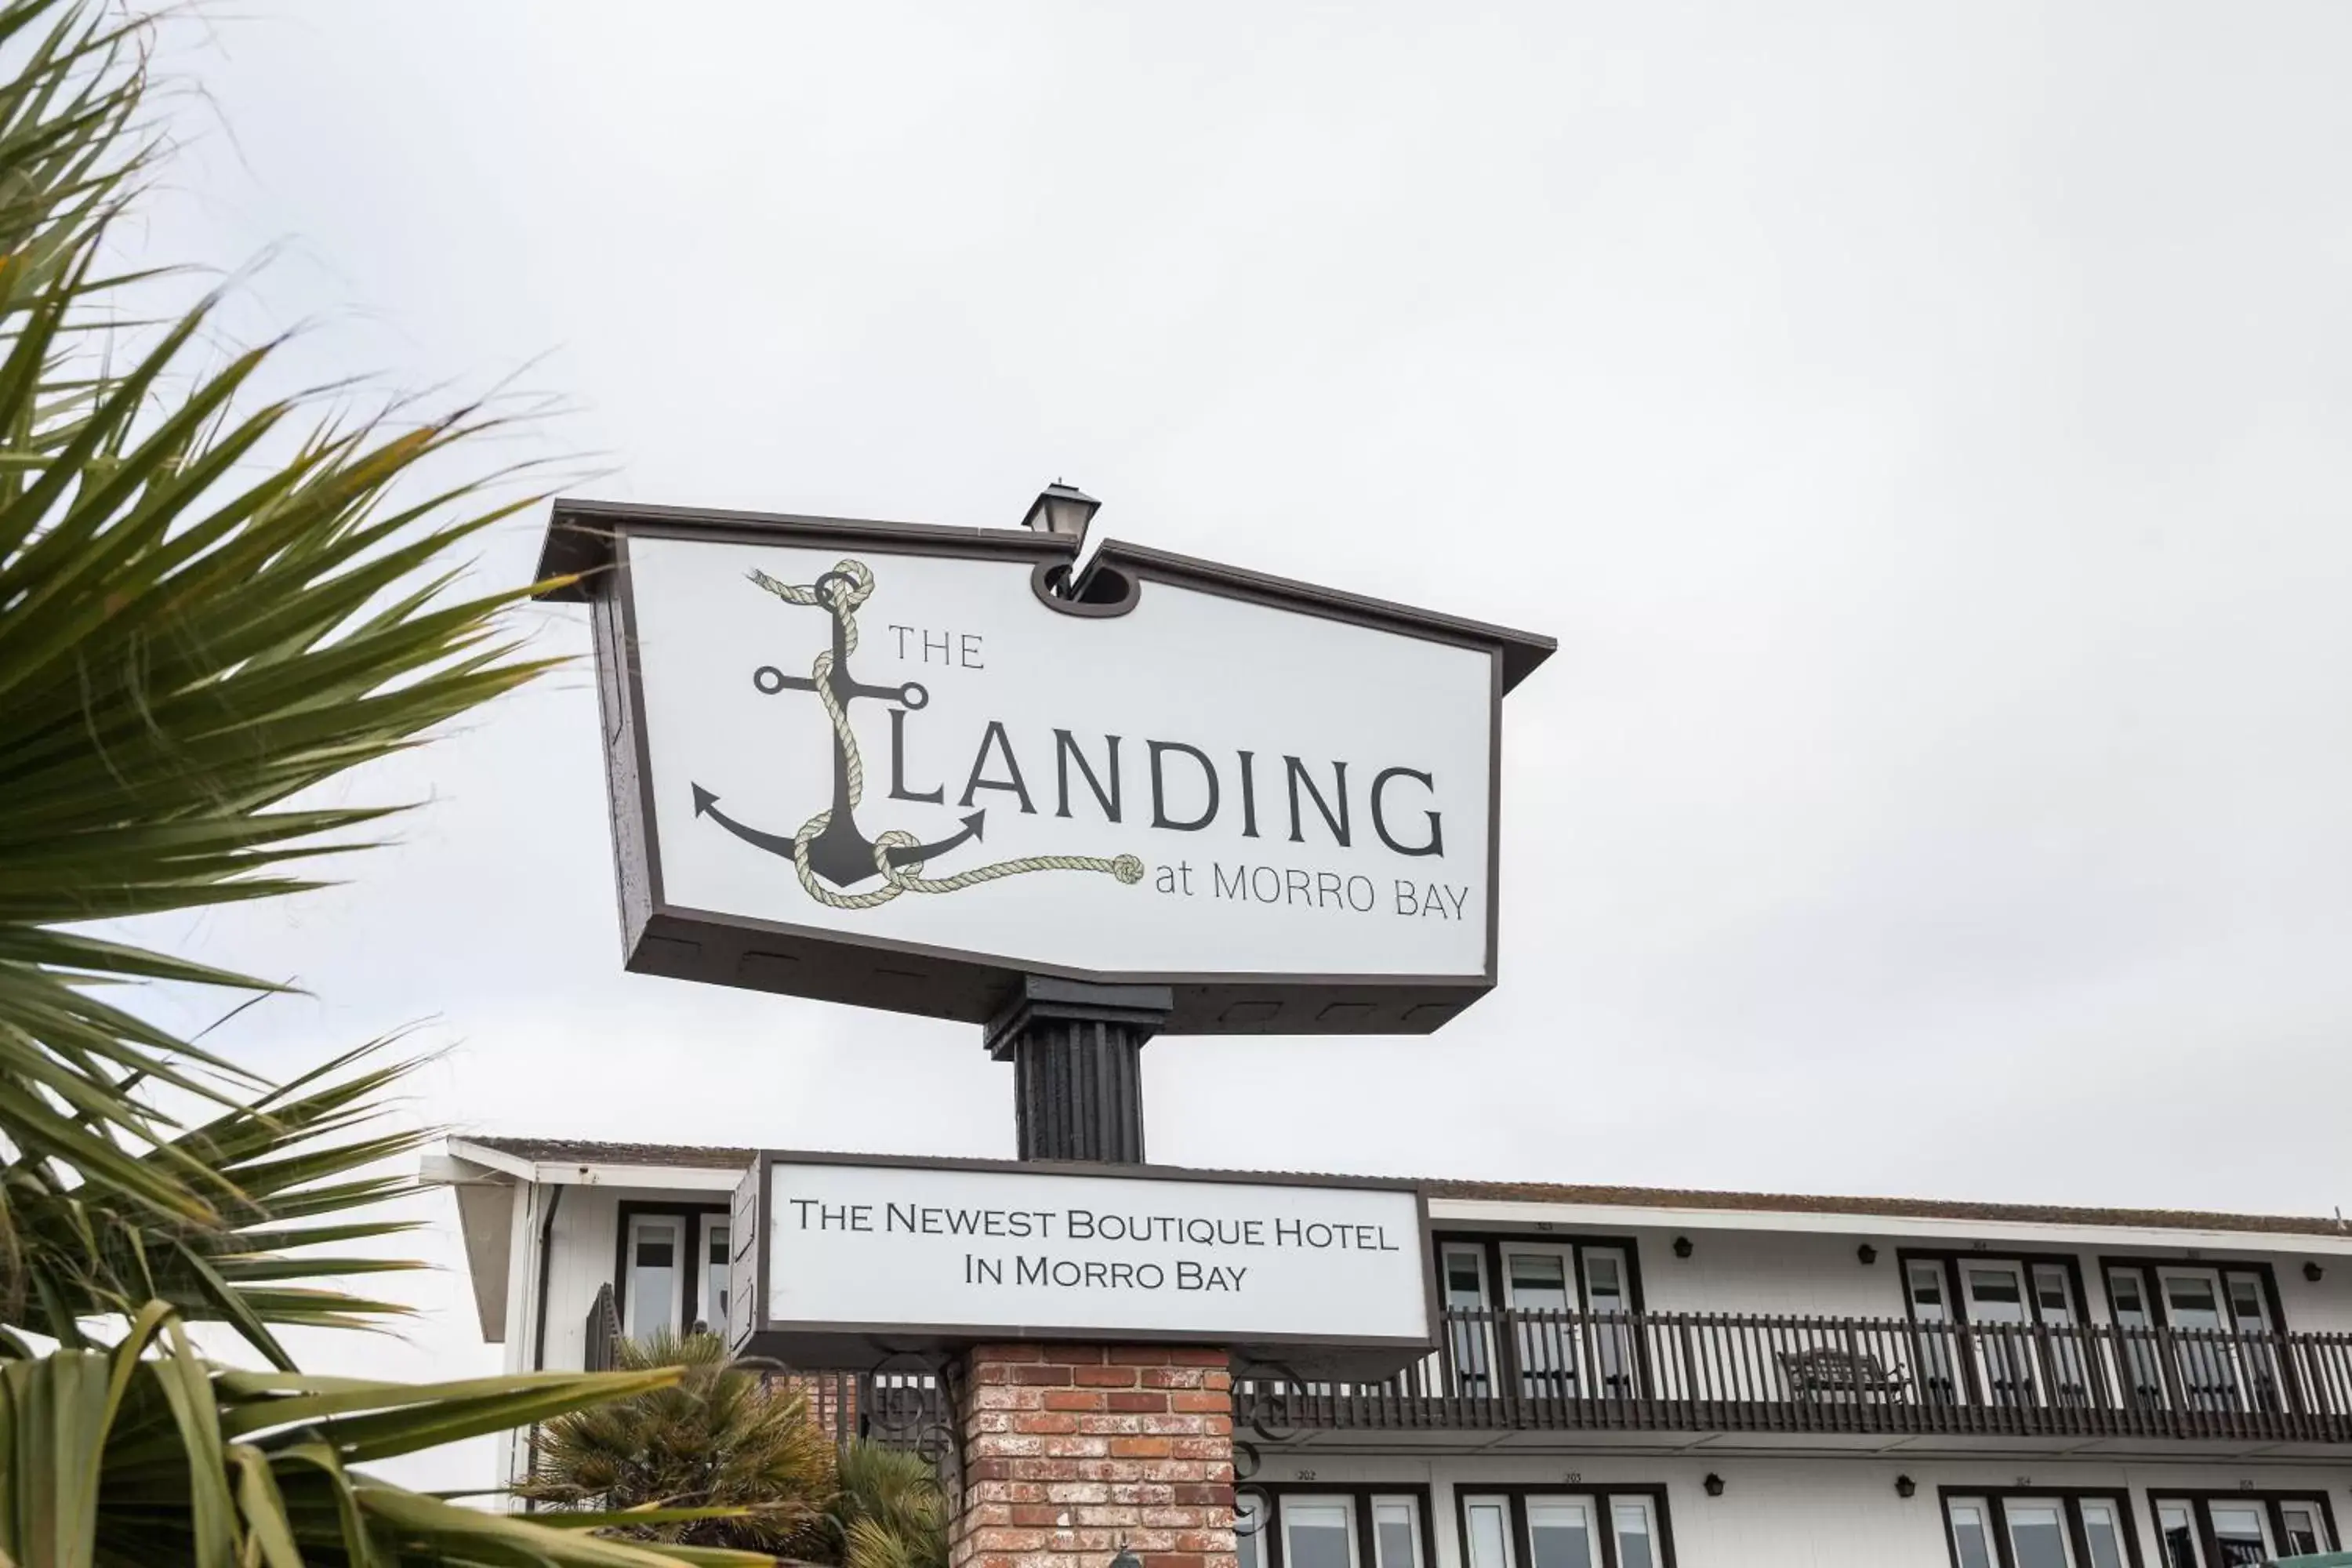 Property logo or sign in The Landing at Morro Bay